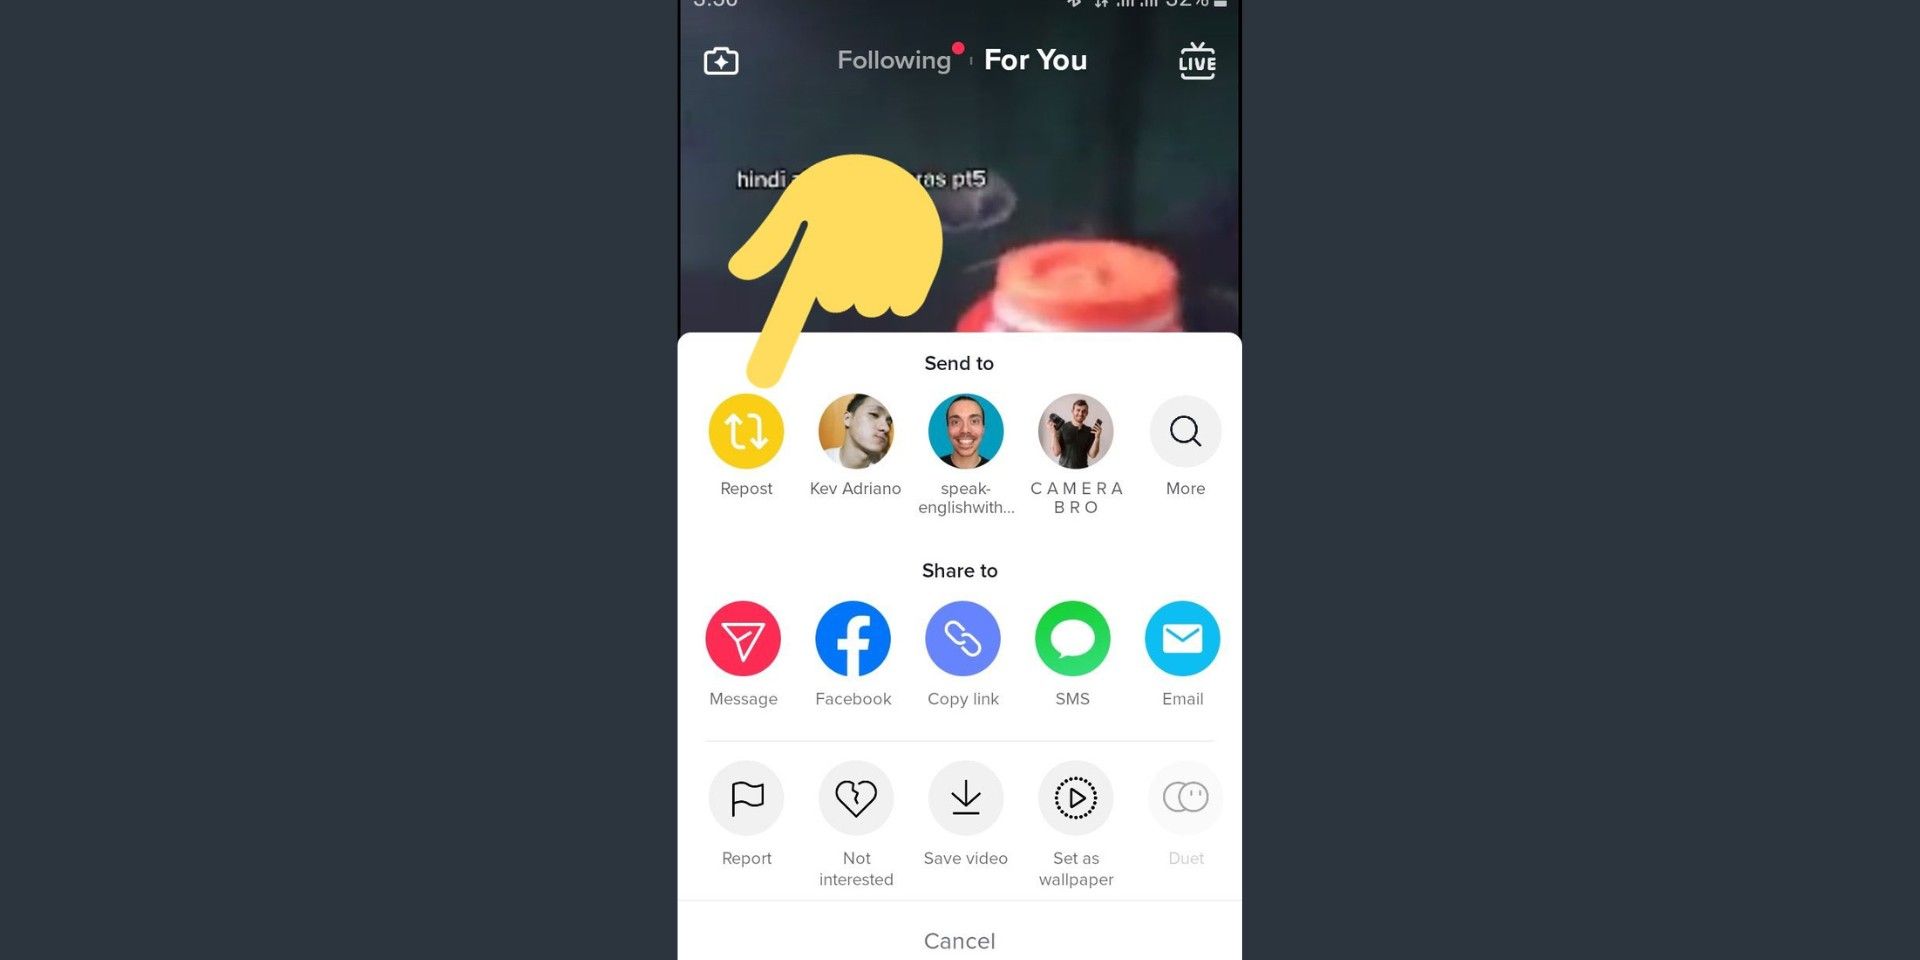 Reposting On TikTok: What Happens When You Press The Repost Button?